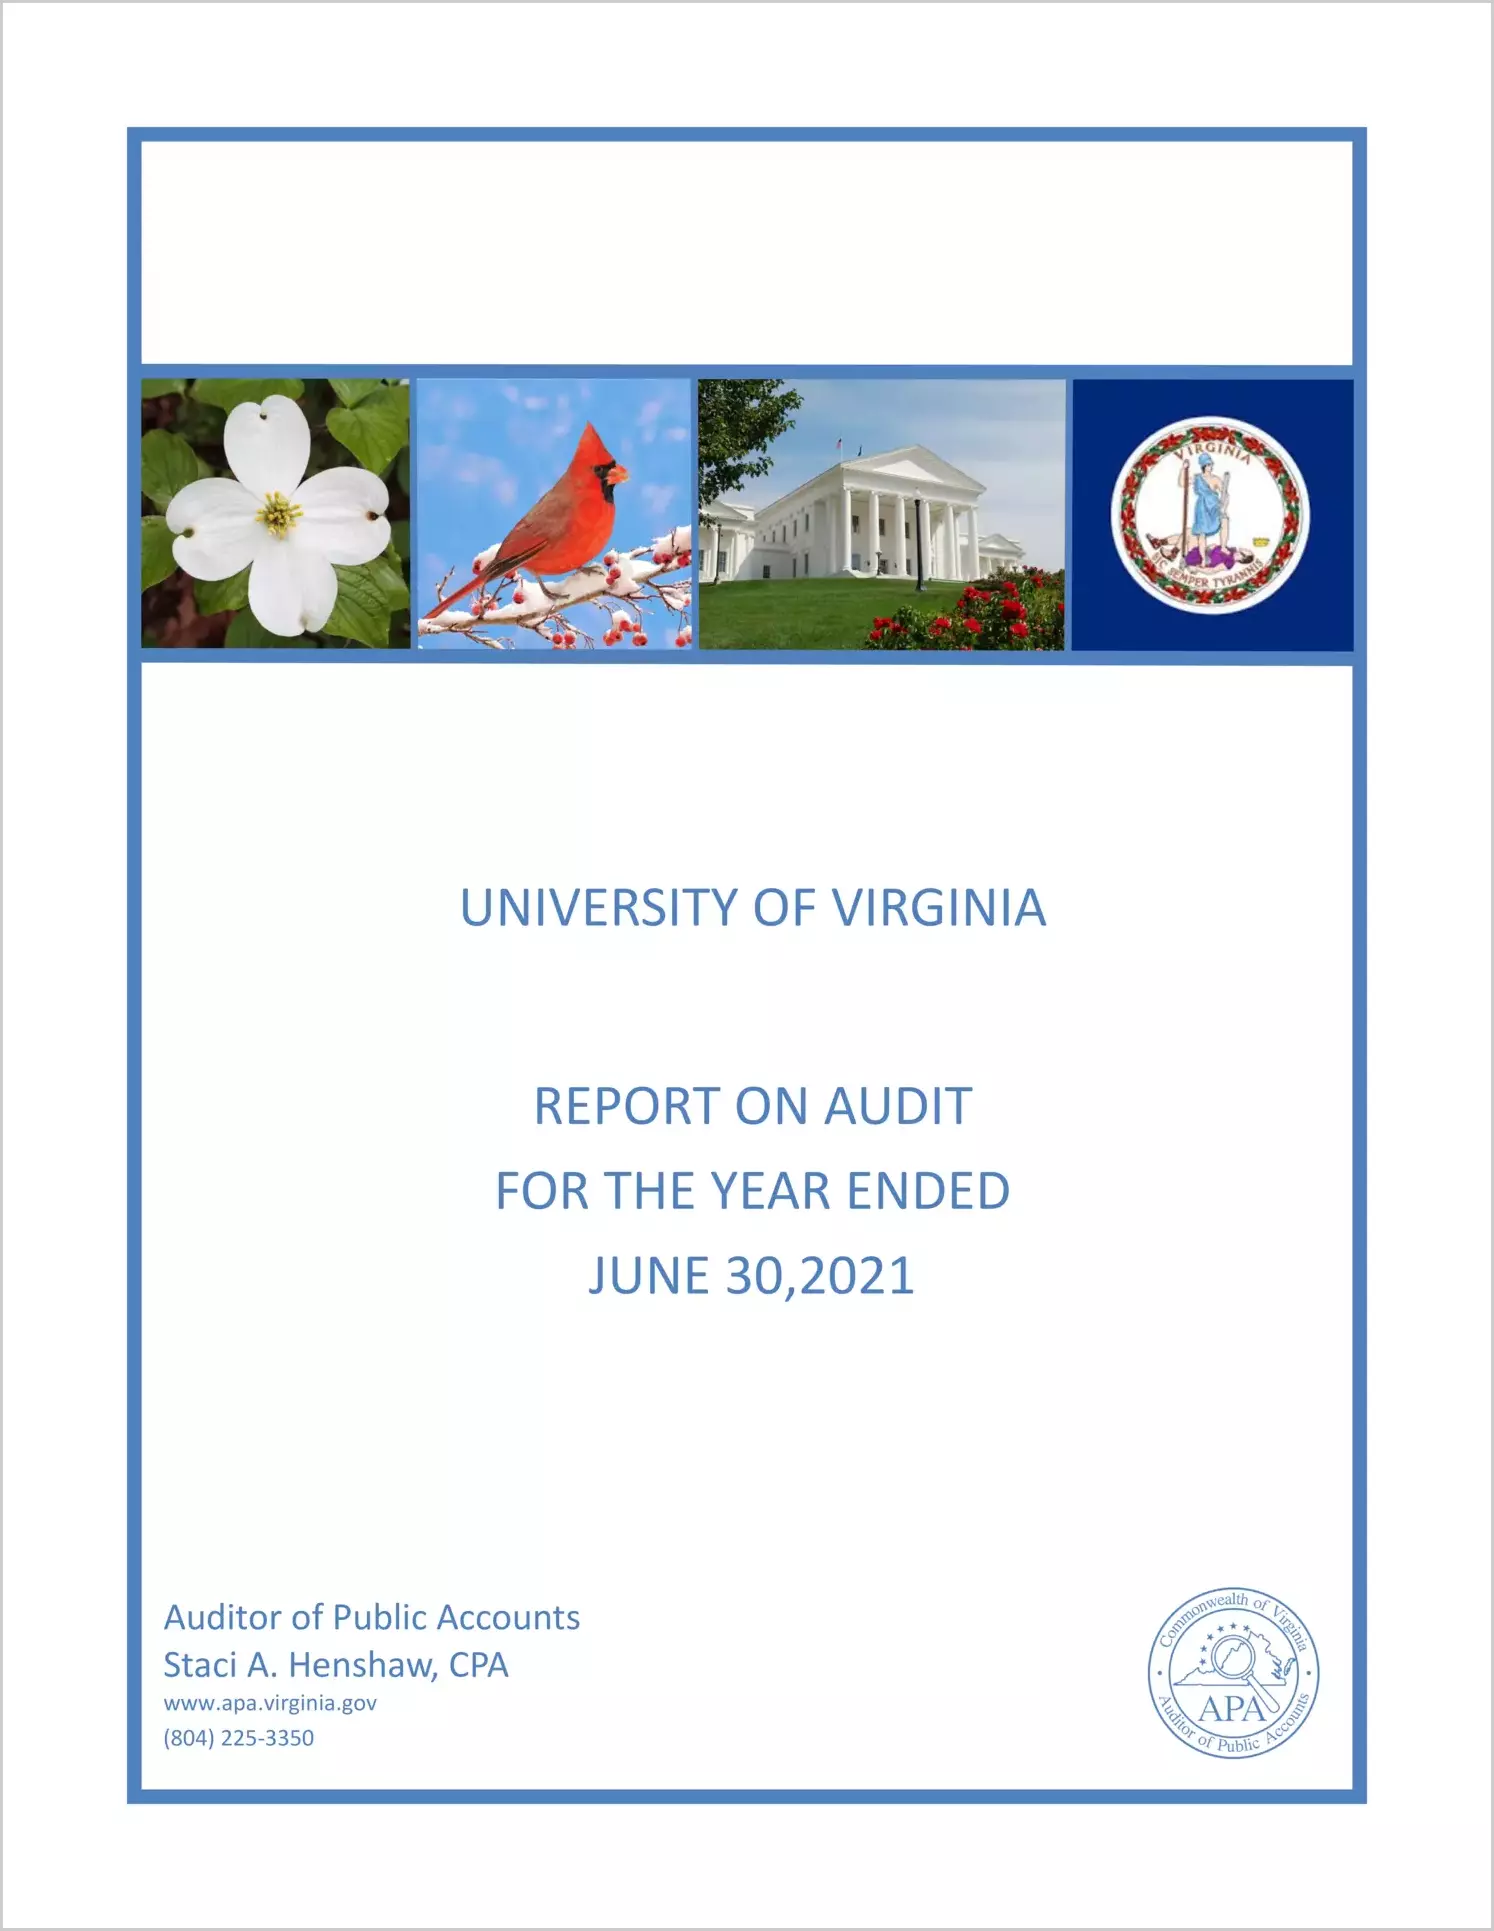 University of Virginia for the year ended June 30, 2021